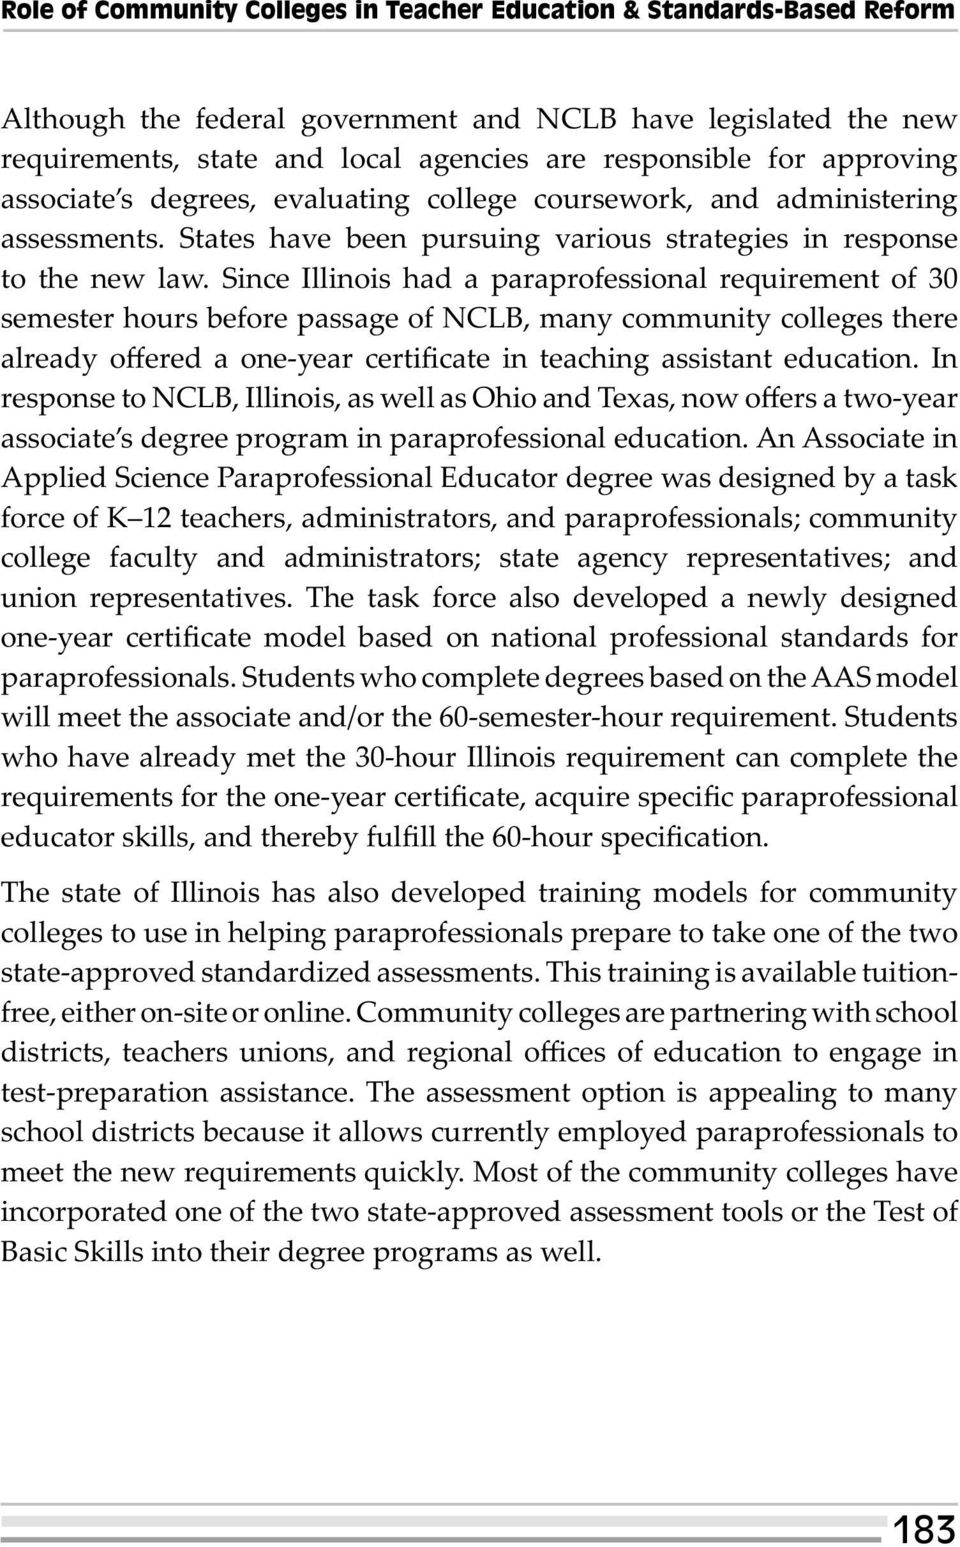 Since Illinois had a paraprofessional requirement of 30 semester hours before passage of NCLB, many community colleges there already offered a one-year certificate in teaching assistant education.